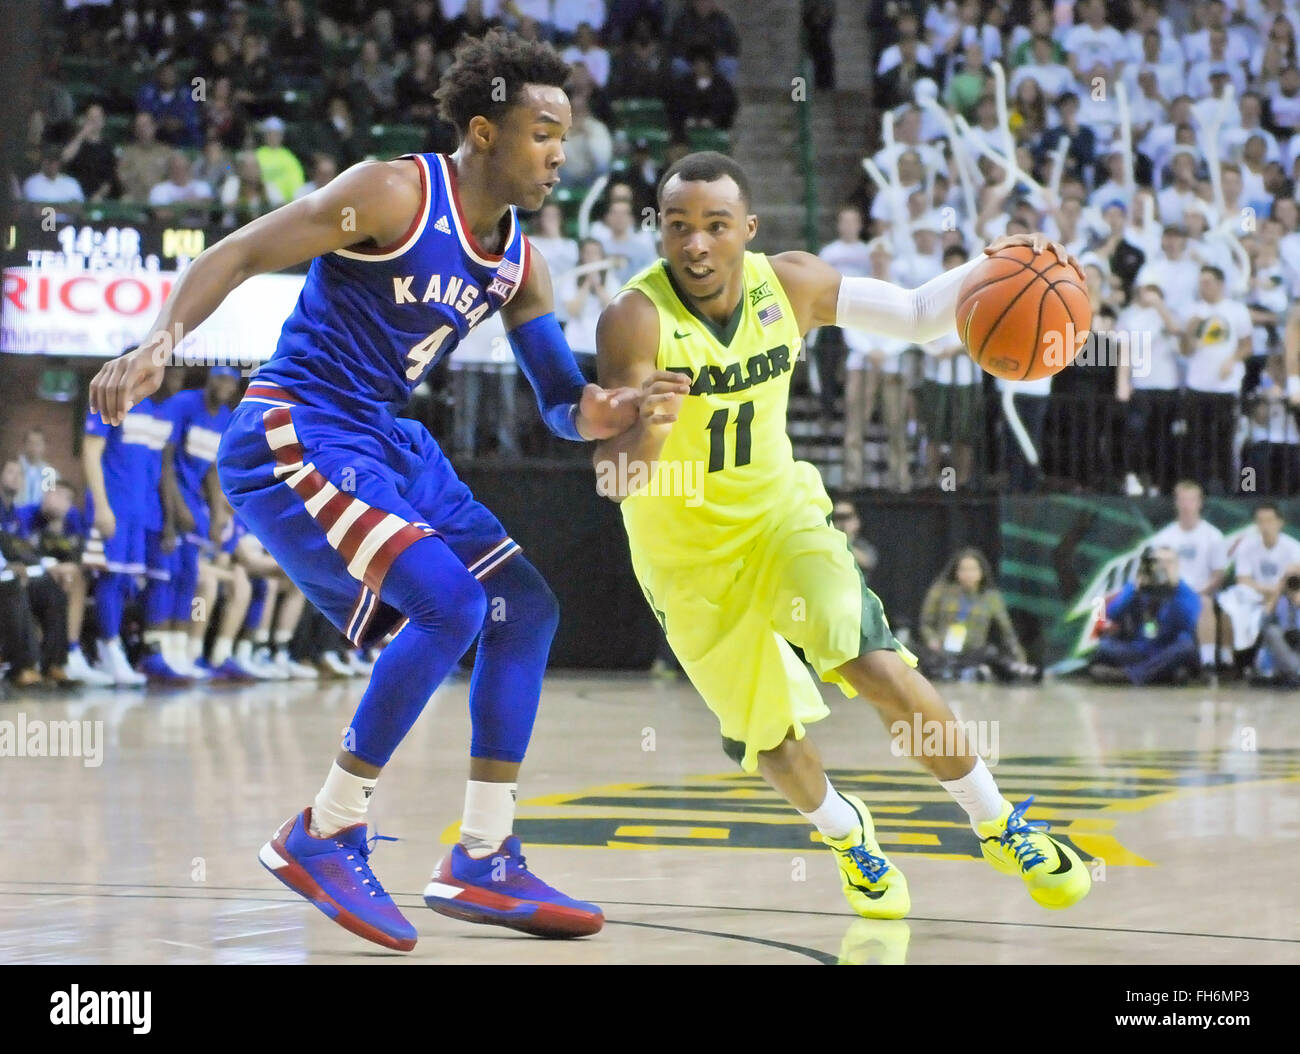 February 23, 2016: Baylor guard Lester Medford (11) drives towards the basket against Kansas guard Devonte' Graham (4) during the second half of an NCAA college basketball game between the Kansas Jayhawks and Baylor Bears at the Ferrell Center. Kansas won 66-60. Austin McAfee/CSM Stock Photo